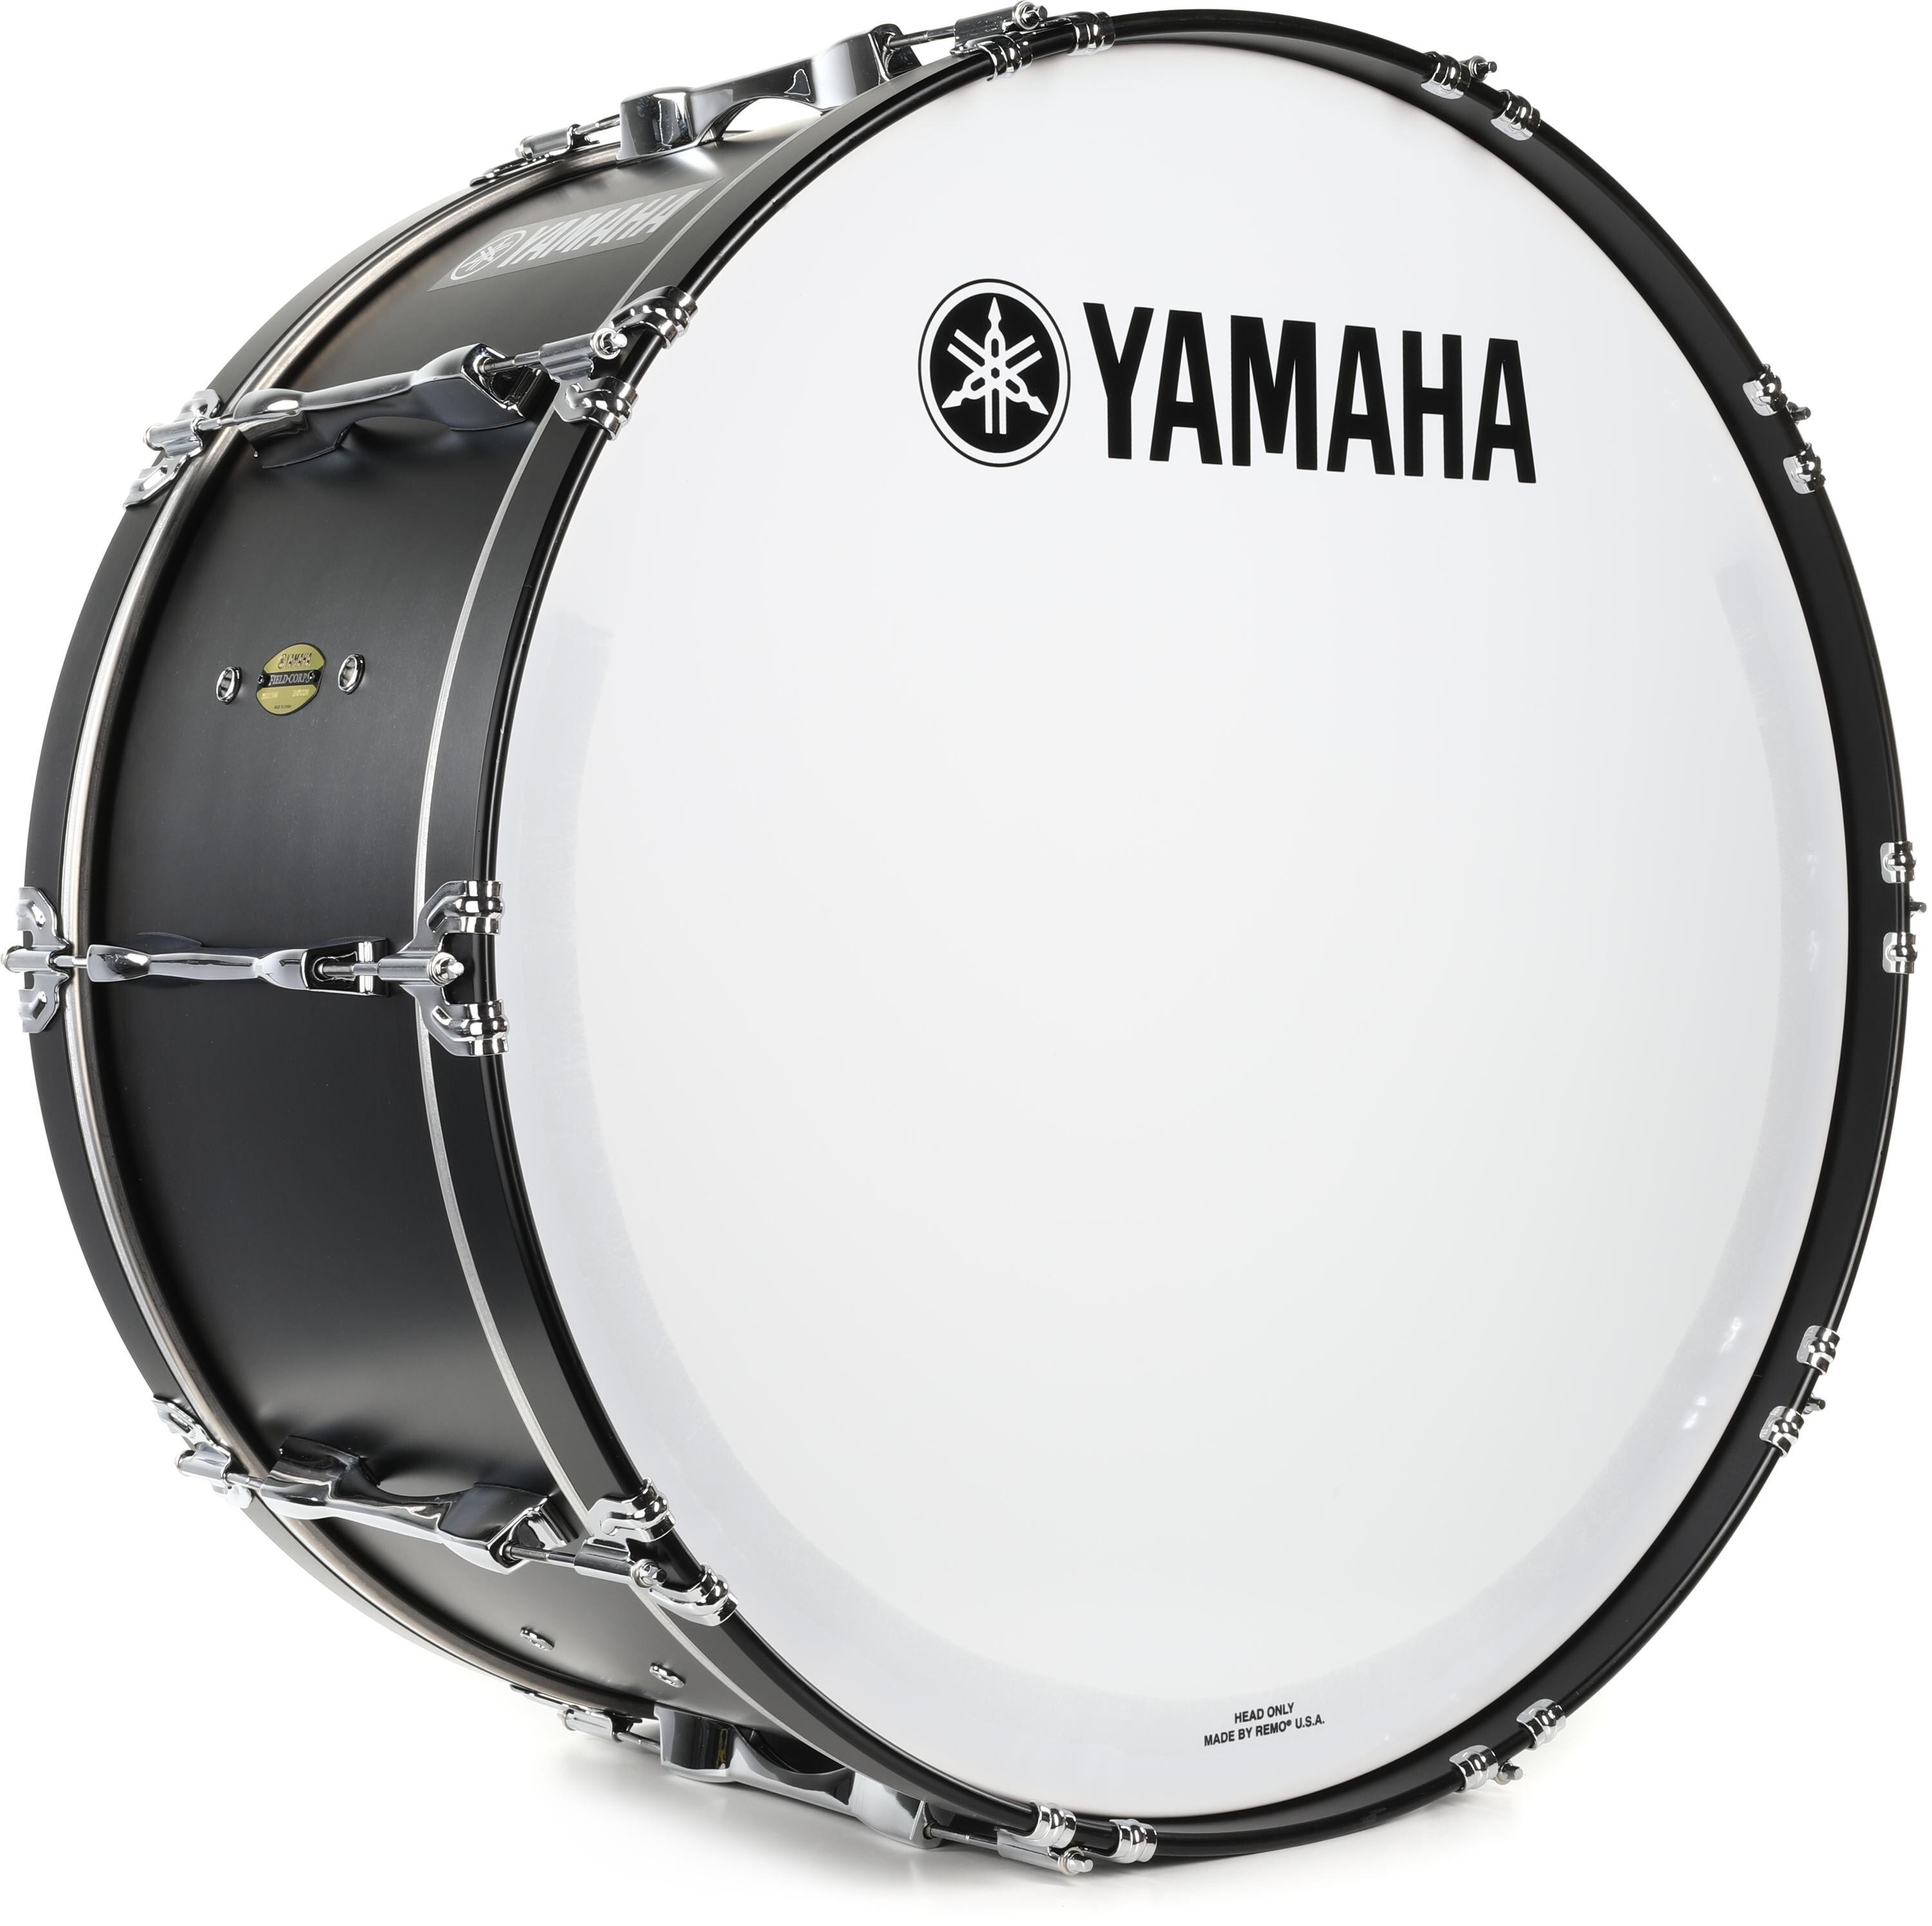 Yamaha 8300 Field-Corps Series 30 inch Marching Bass Drum - Black Forest